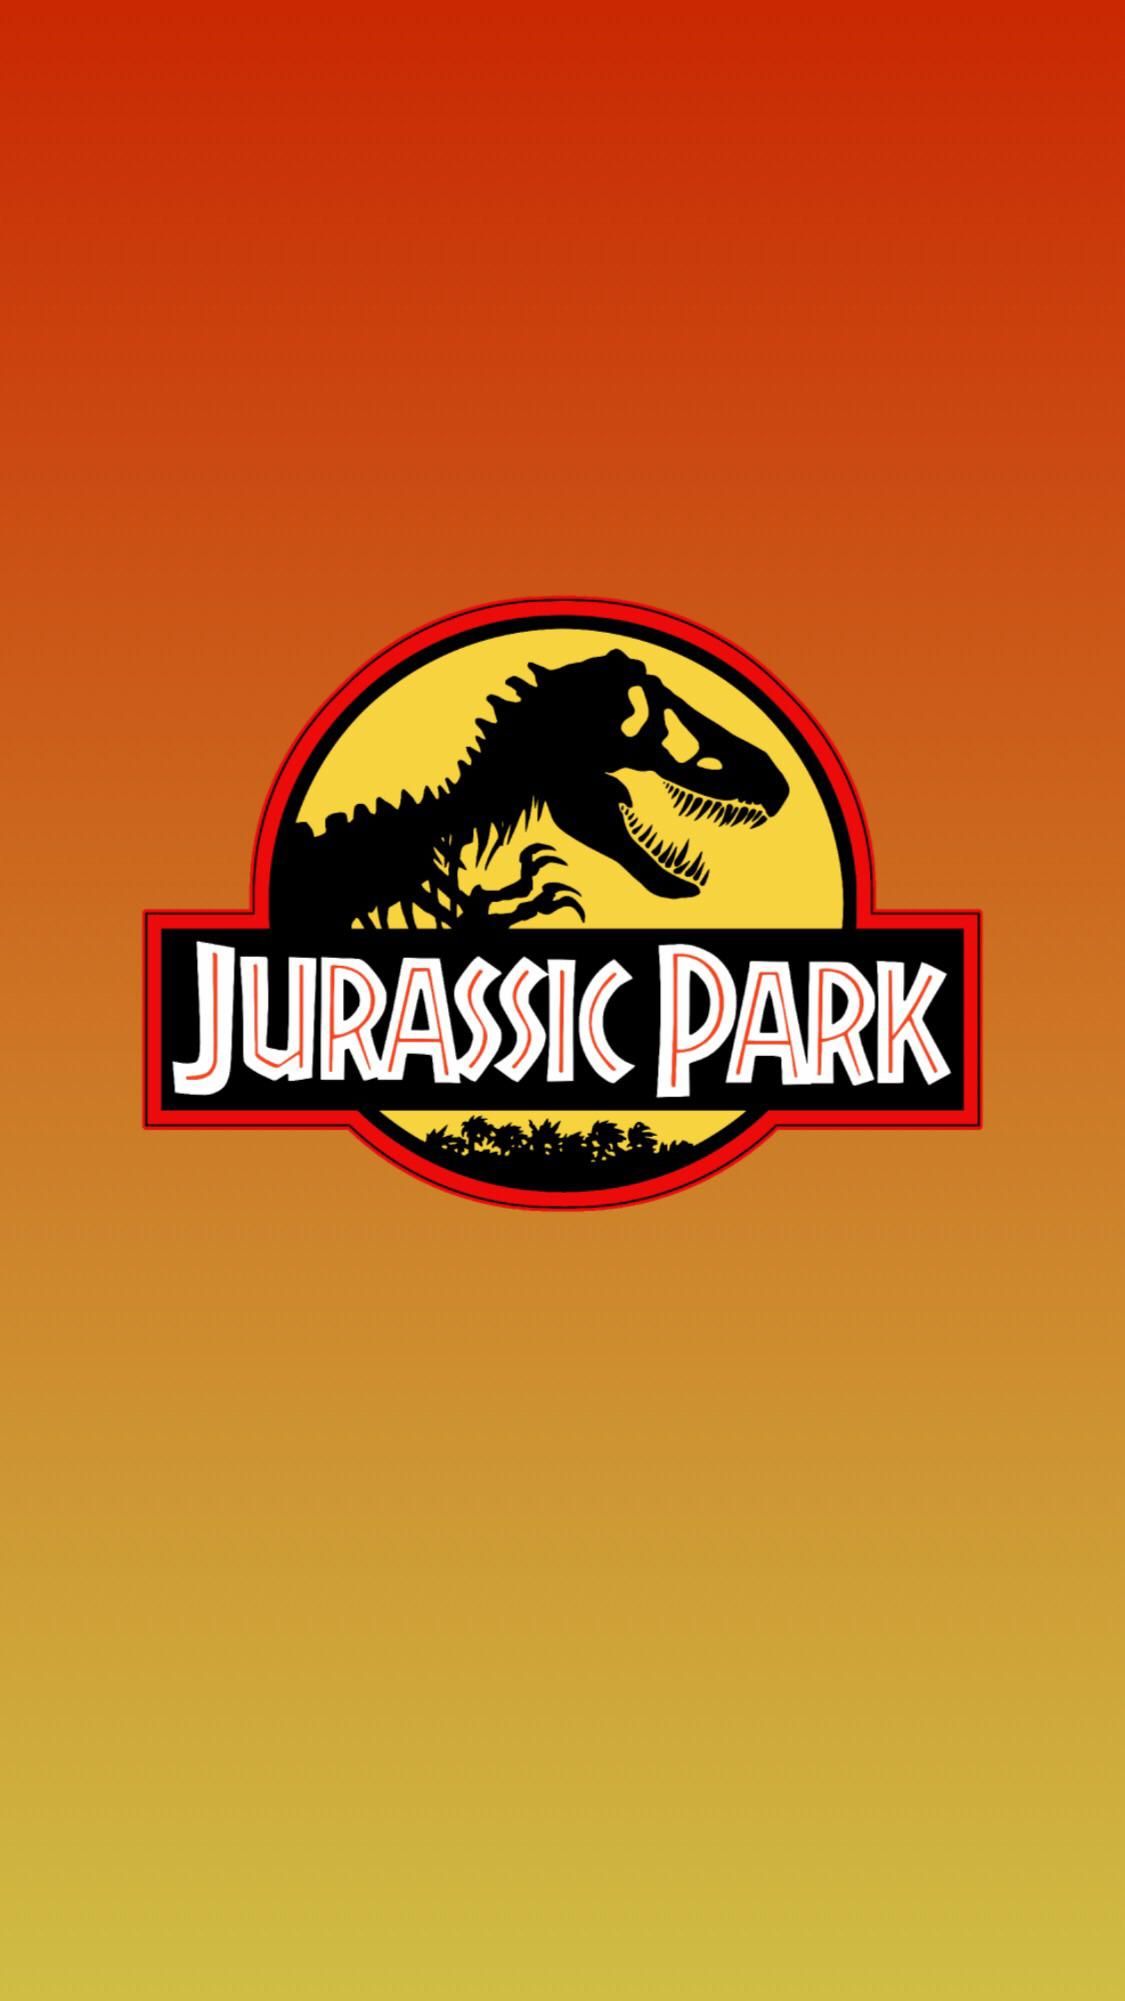 50 Jurassic Park HD Wallpapers and Backgrounds